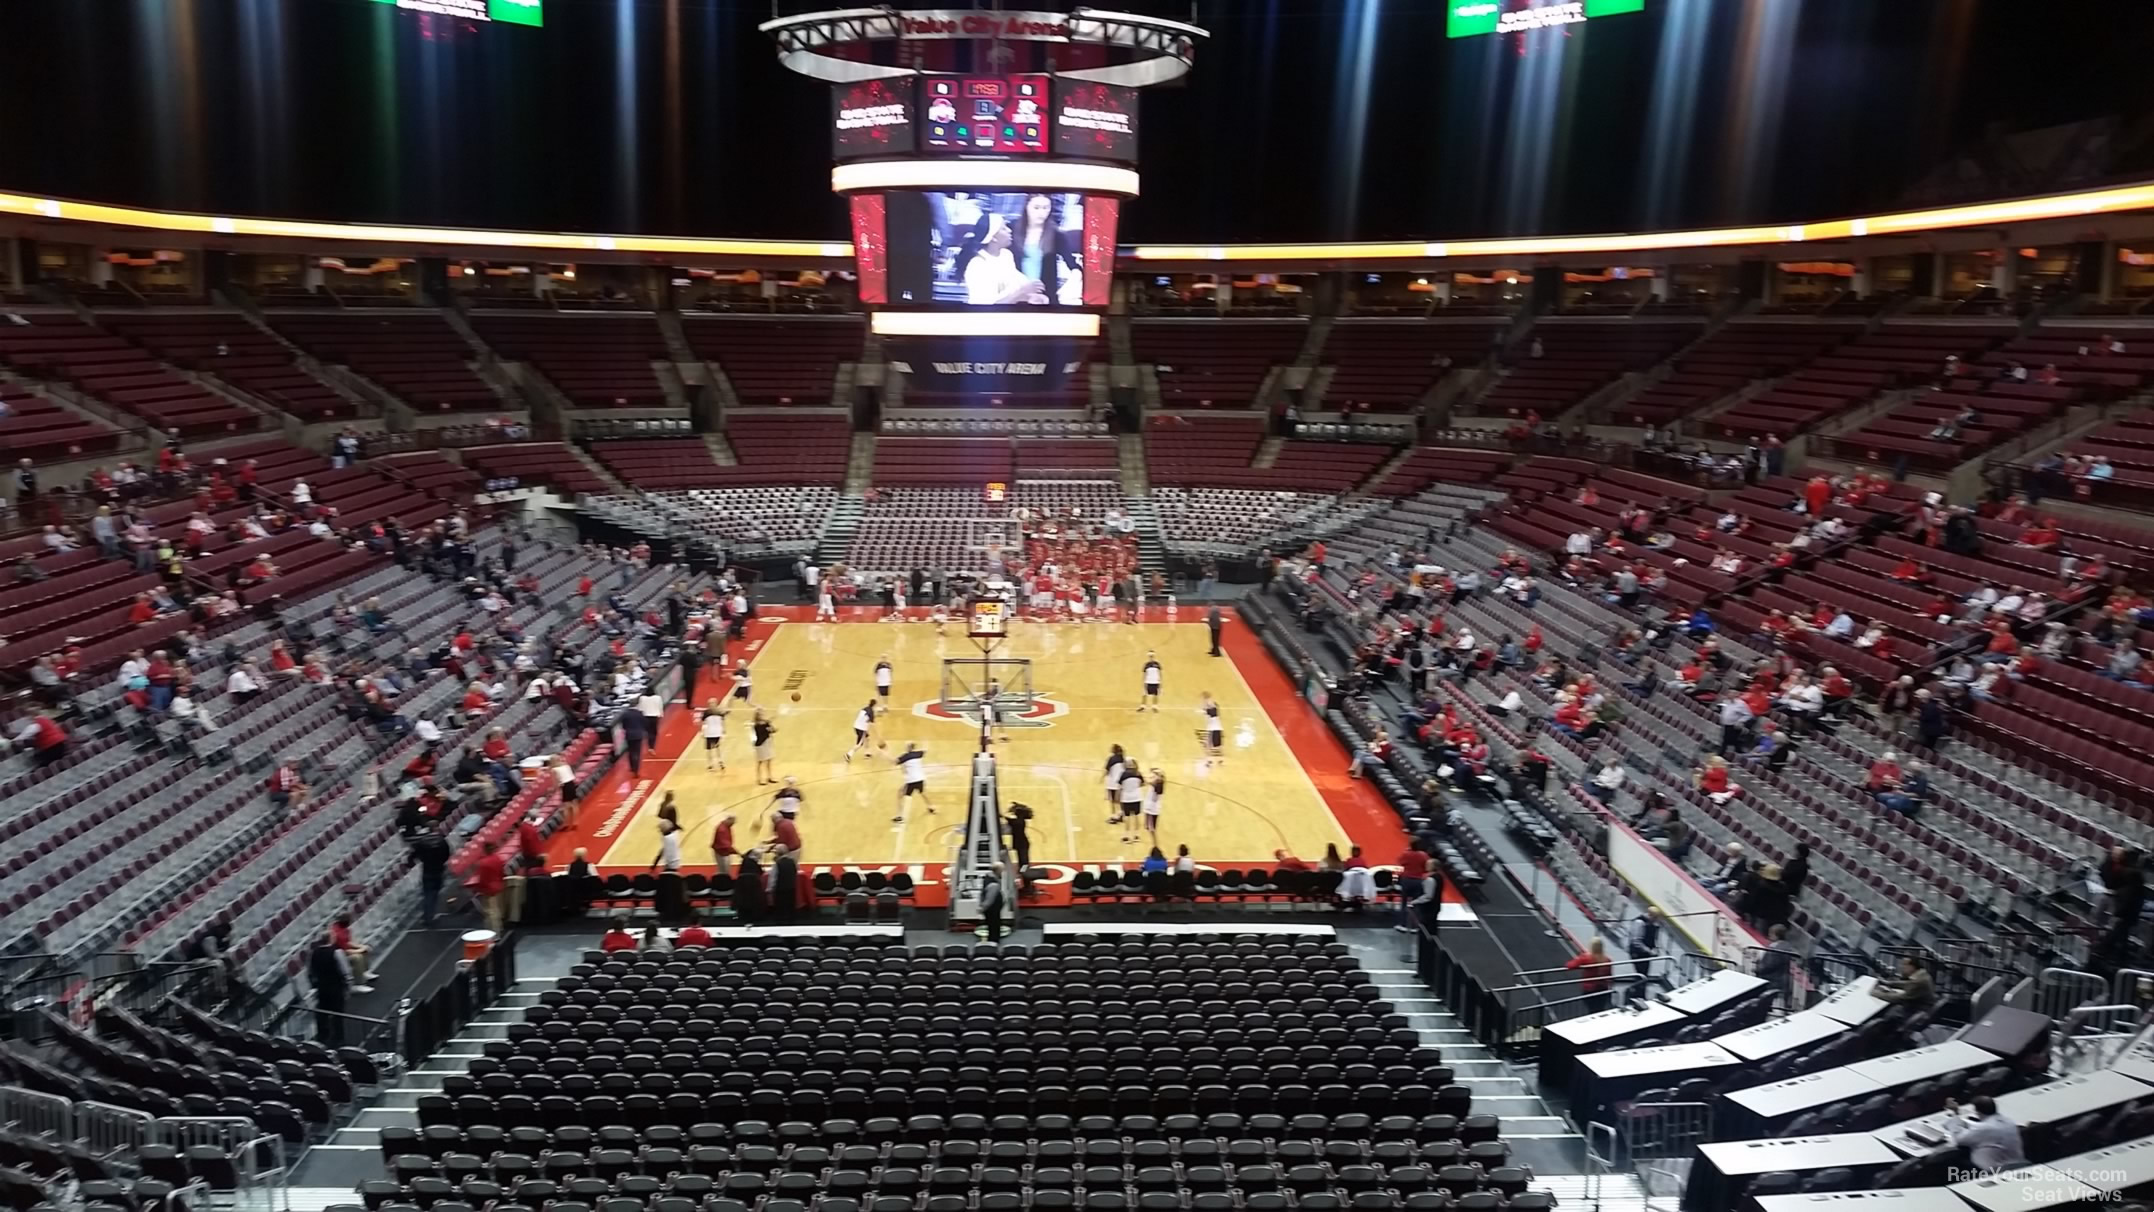 section 231, row h seat view  for basketball - schottenstein center